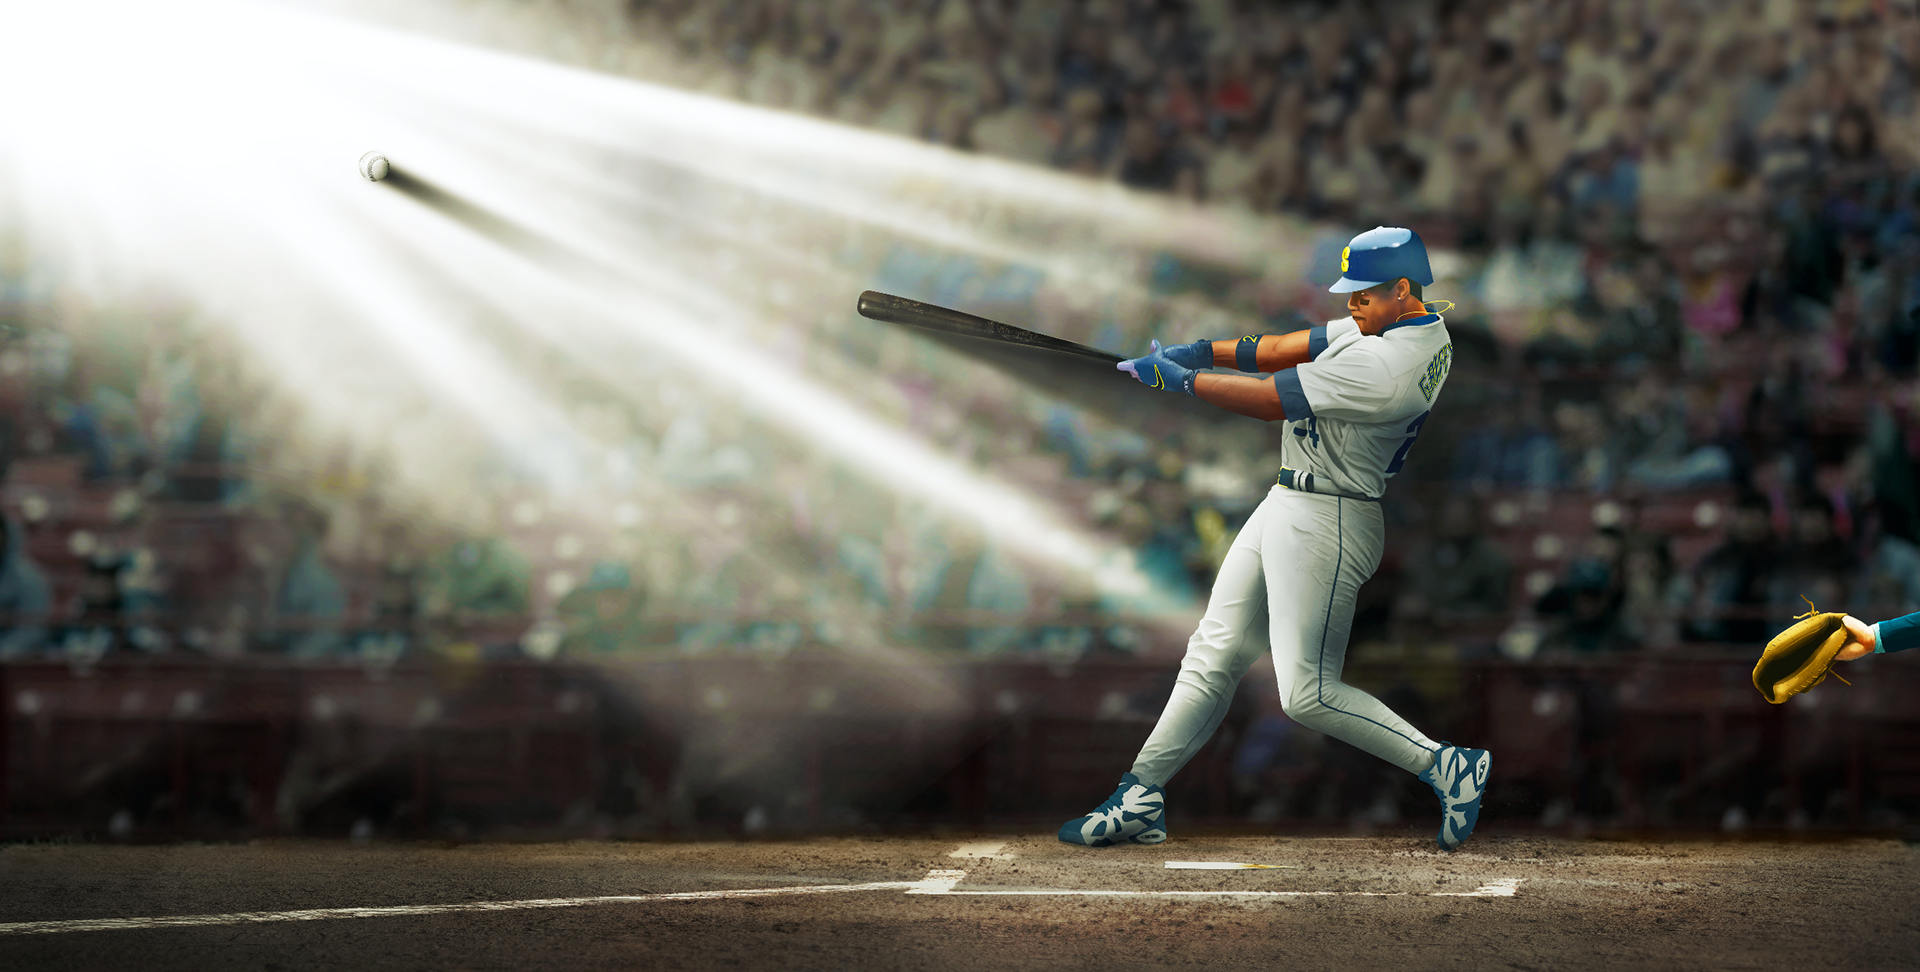 Nike's Ken Griffey Jr. Swingman Collection Is This Summer's Best Baseball  Fashion Collaboration - BroBible